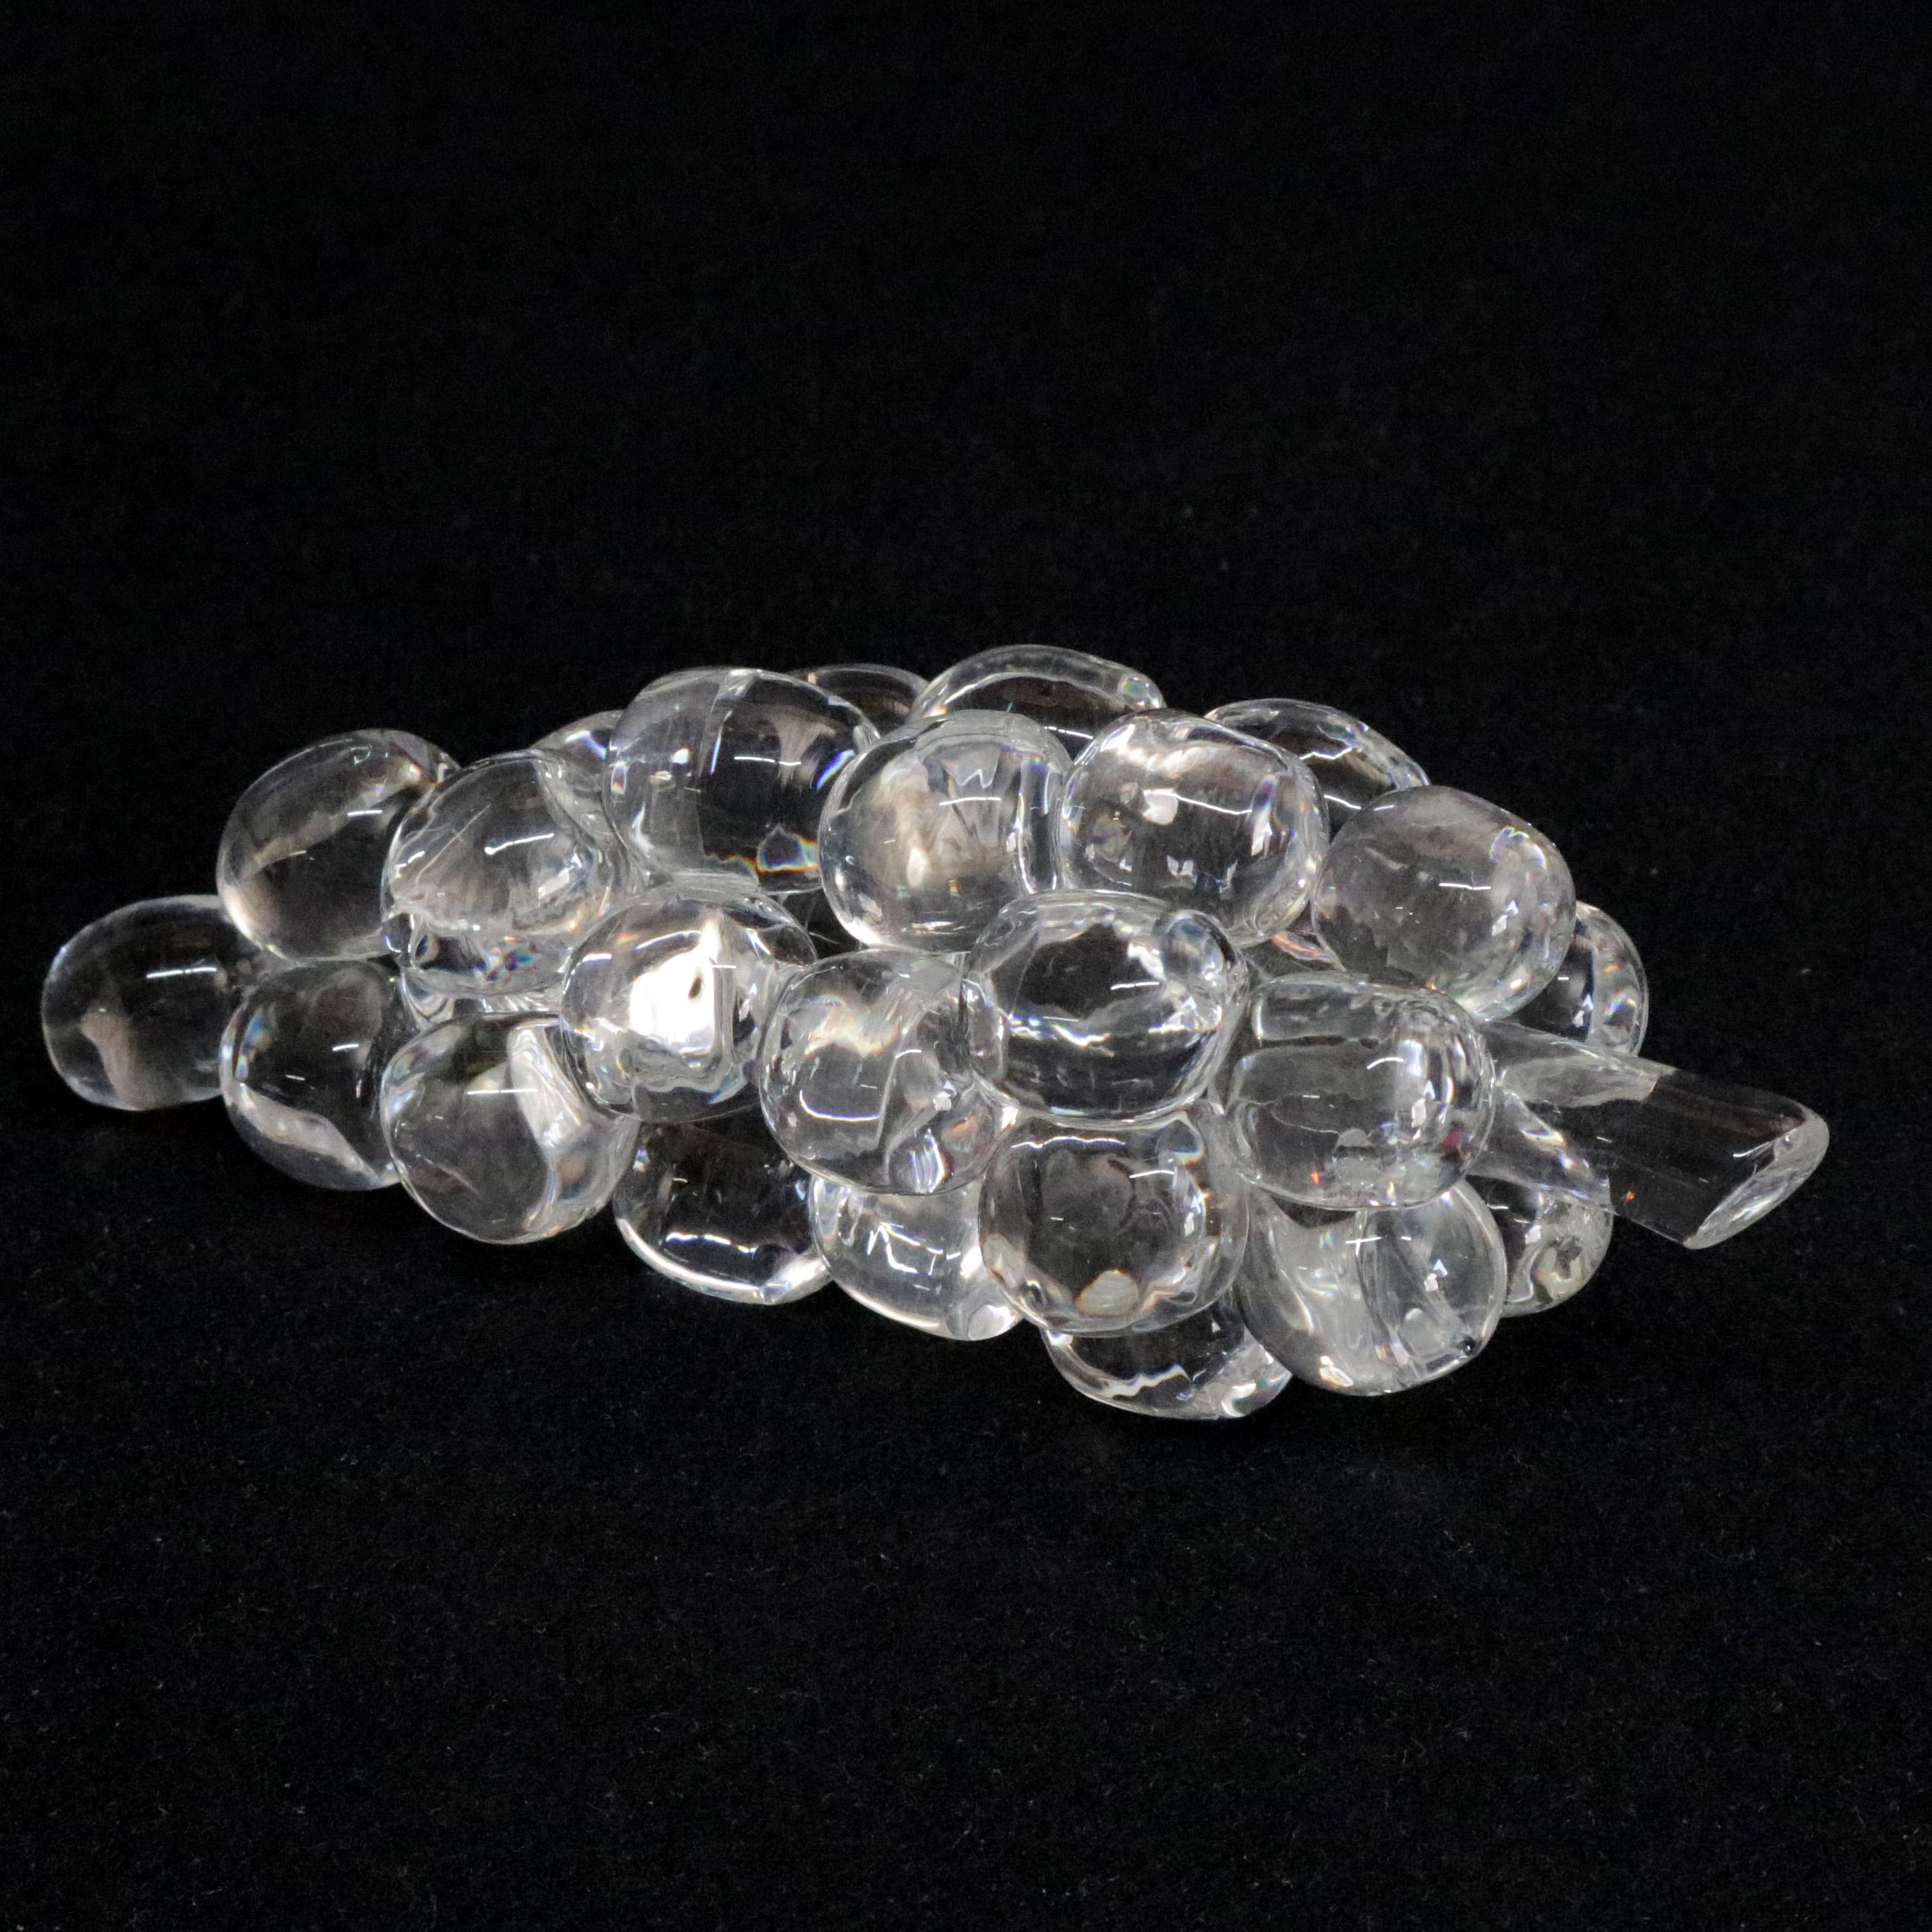 Mid-Century Modern Steuben Figurative Crystal Fruit Sculpture Paperweight of Grapes, Signed